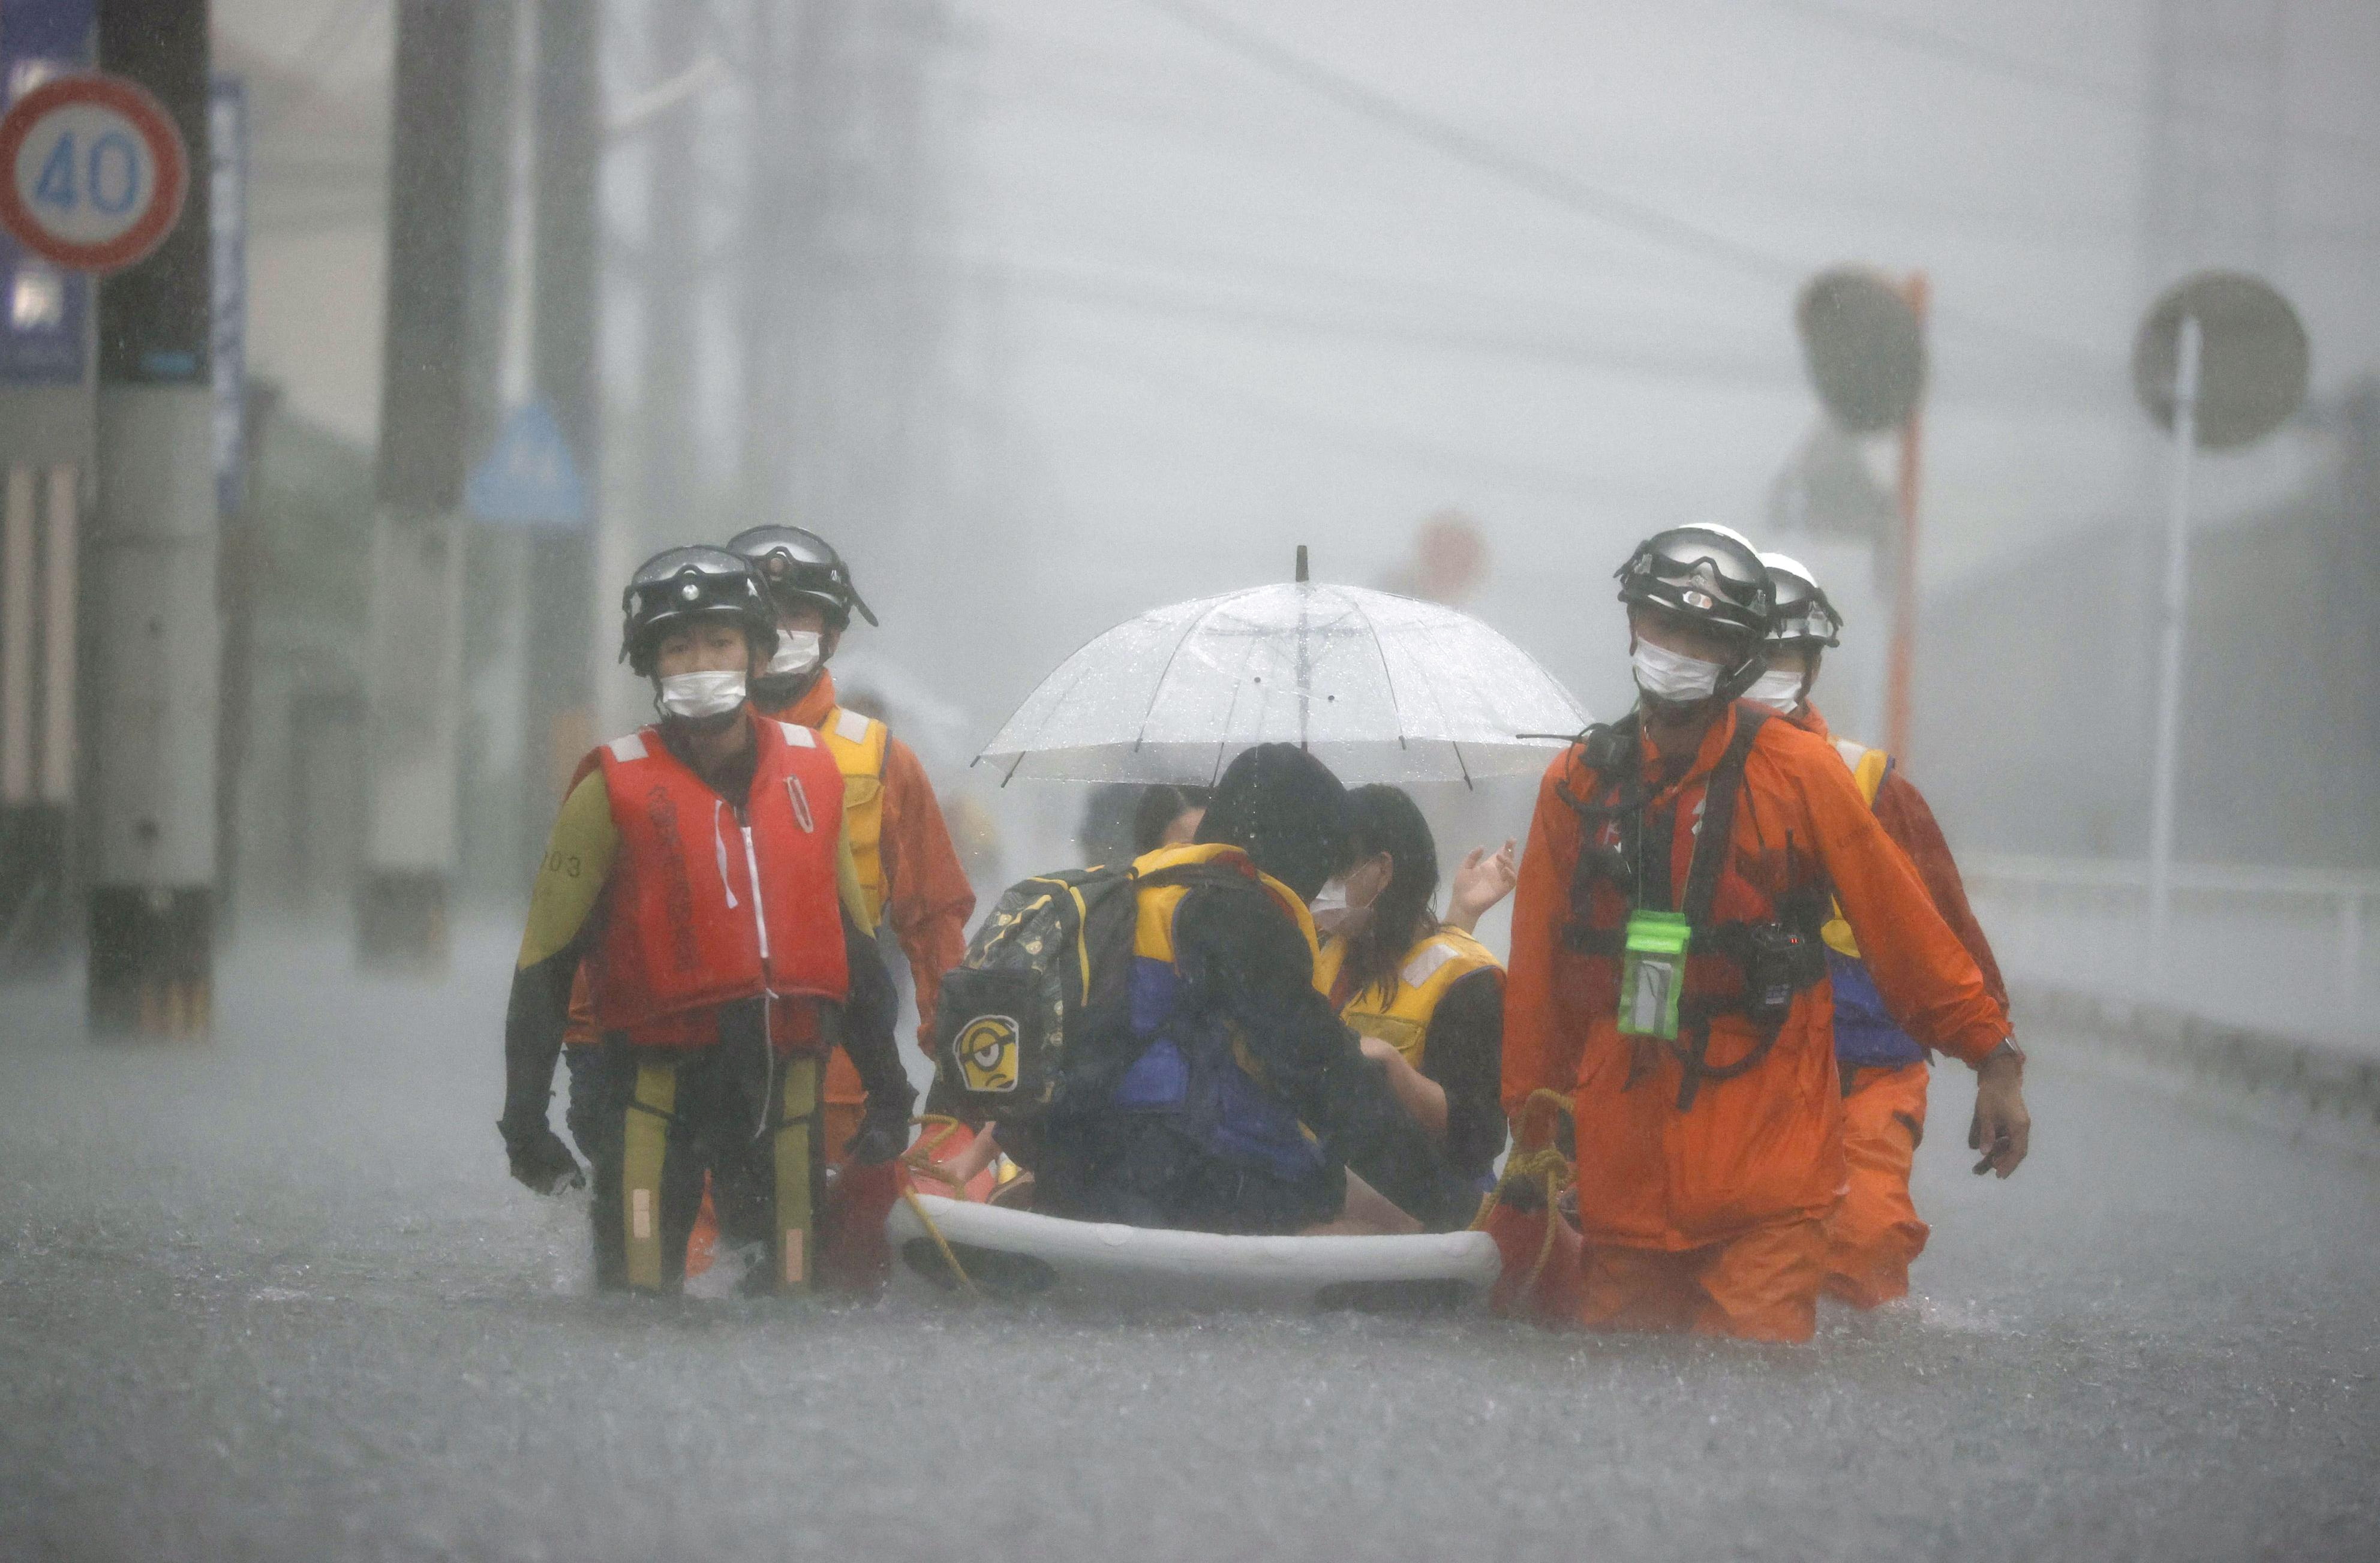 Firefighters transport stranded residents on a boat in a road flooded by heavy rain in Kurume, Japan